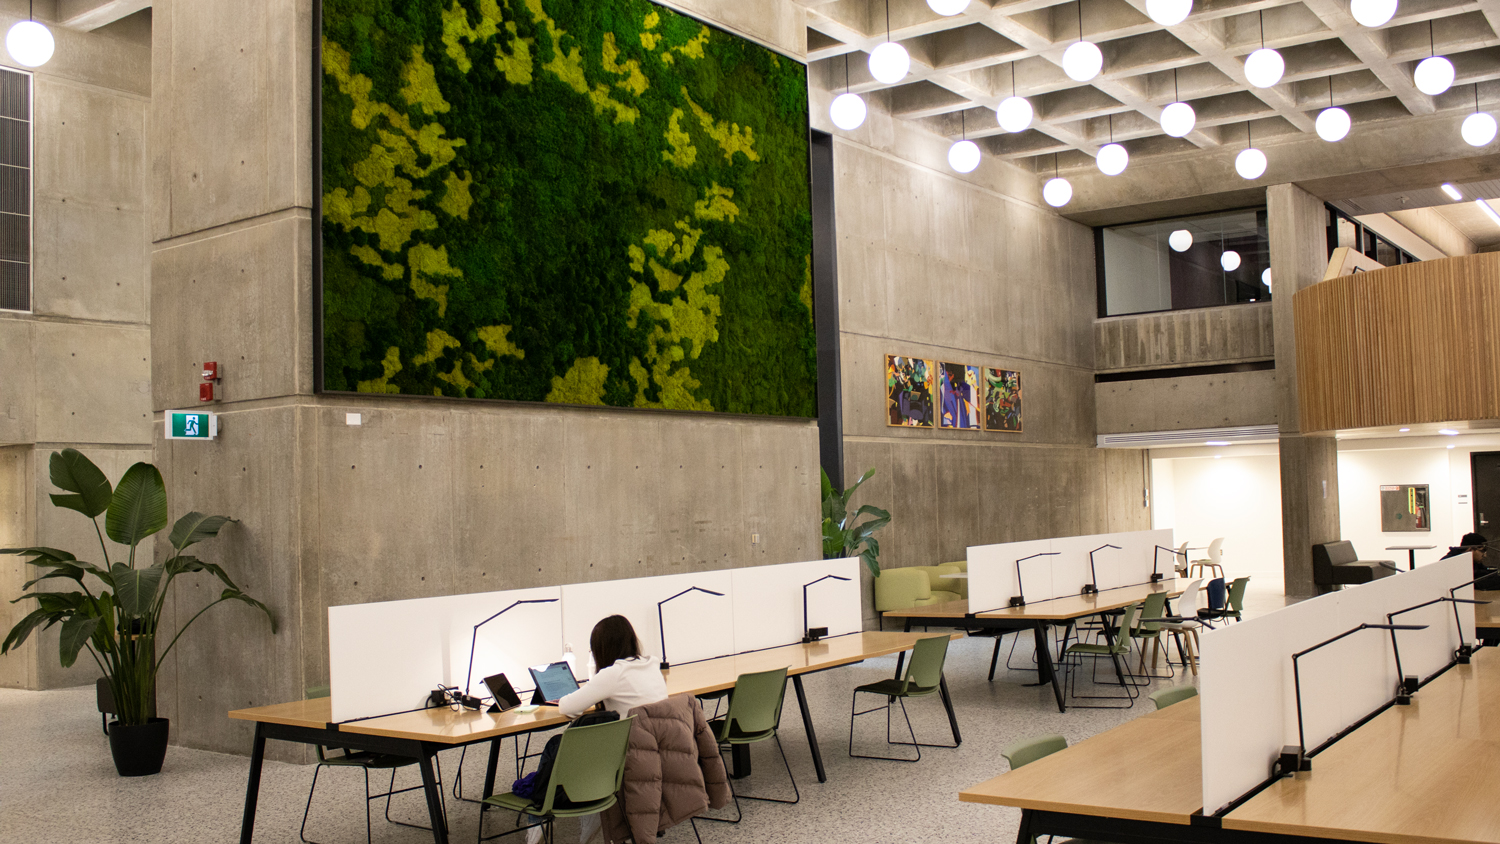 Photo of the moss wall in the Weldon Learning Commons.